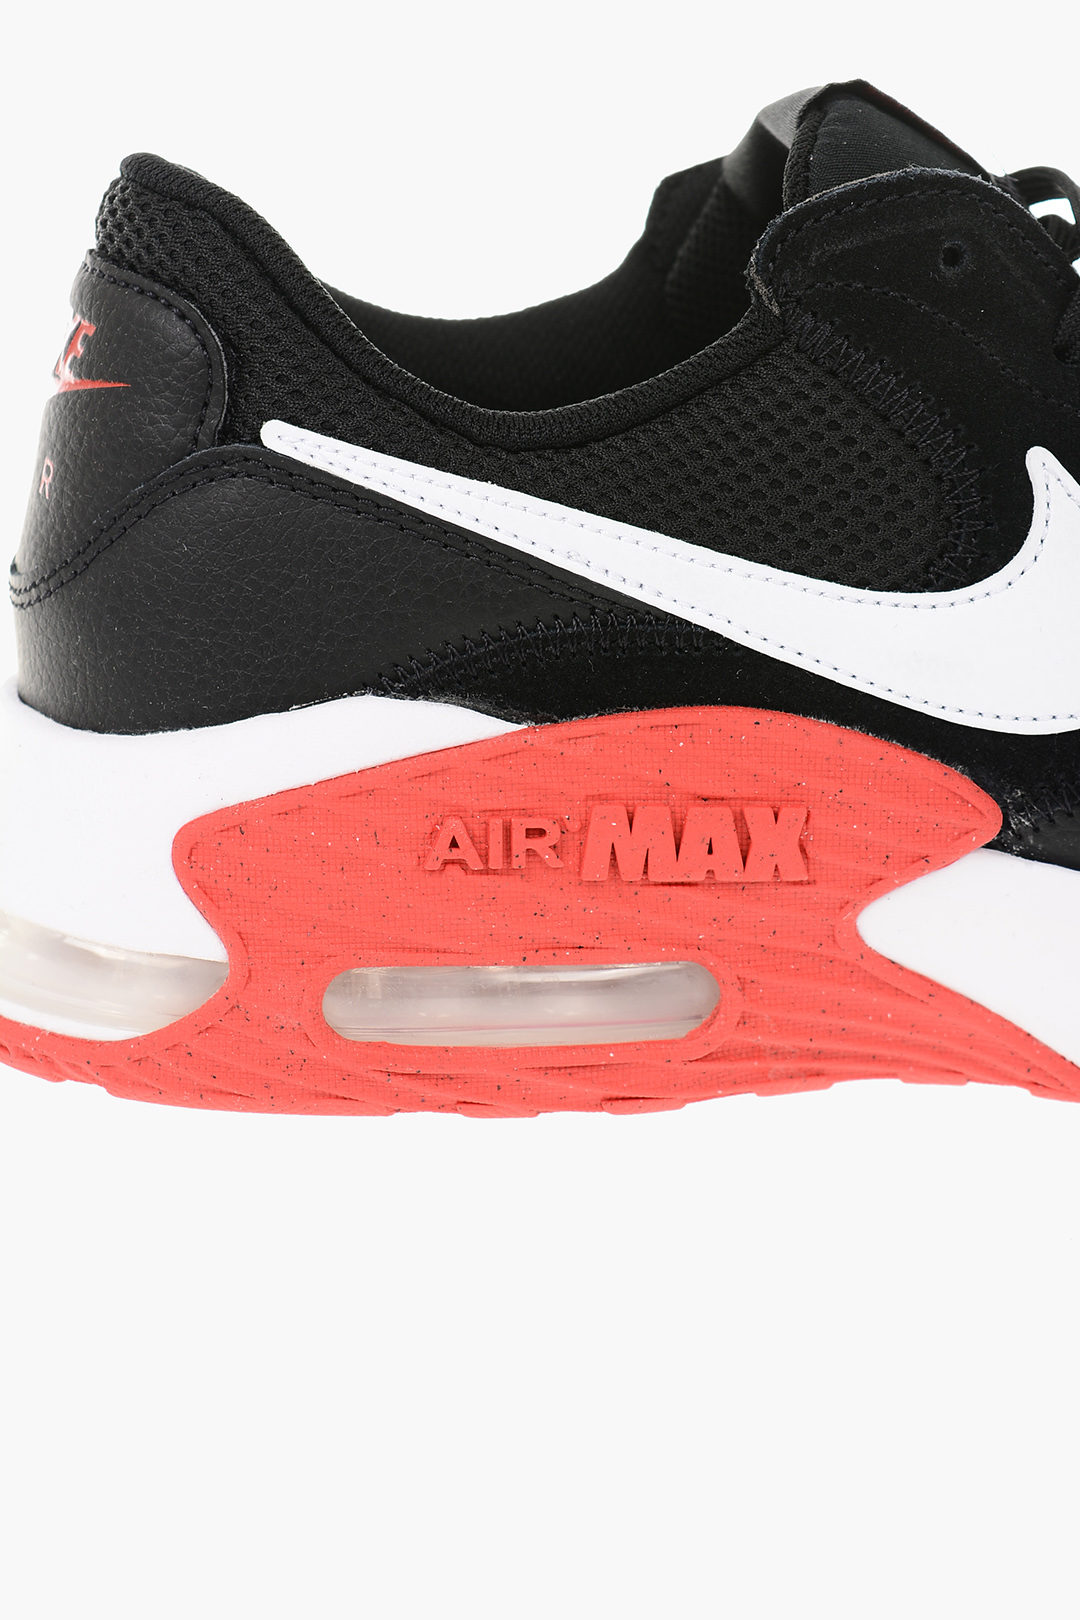 air max nike leather